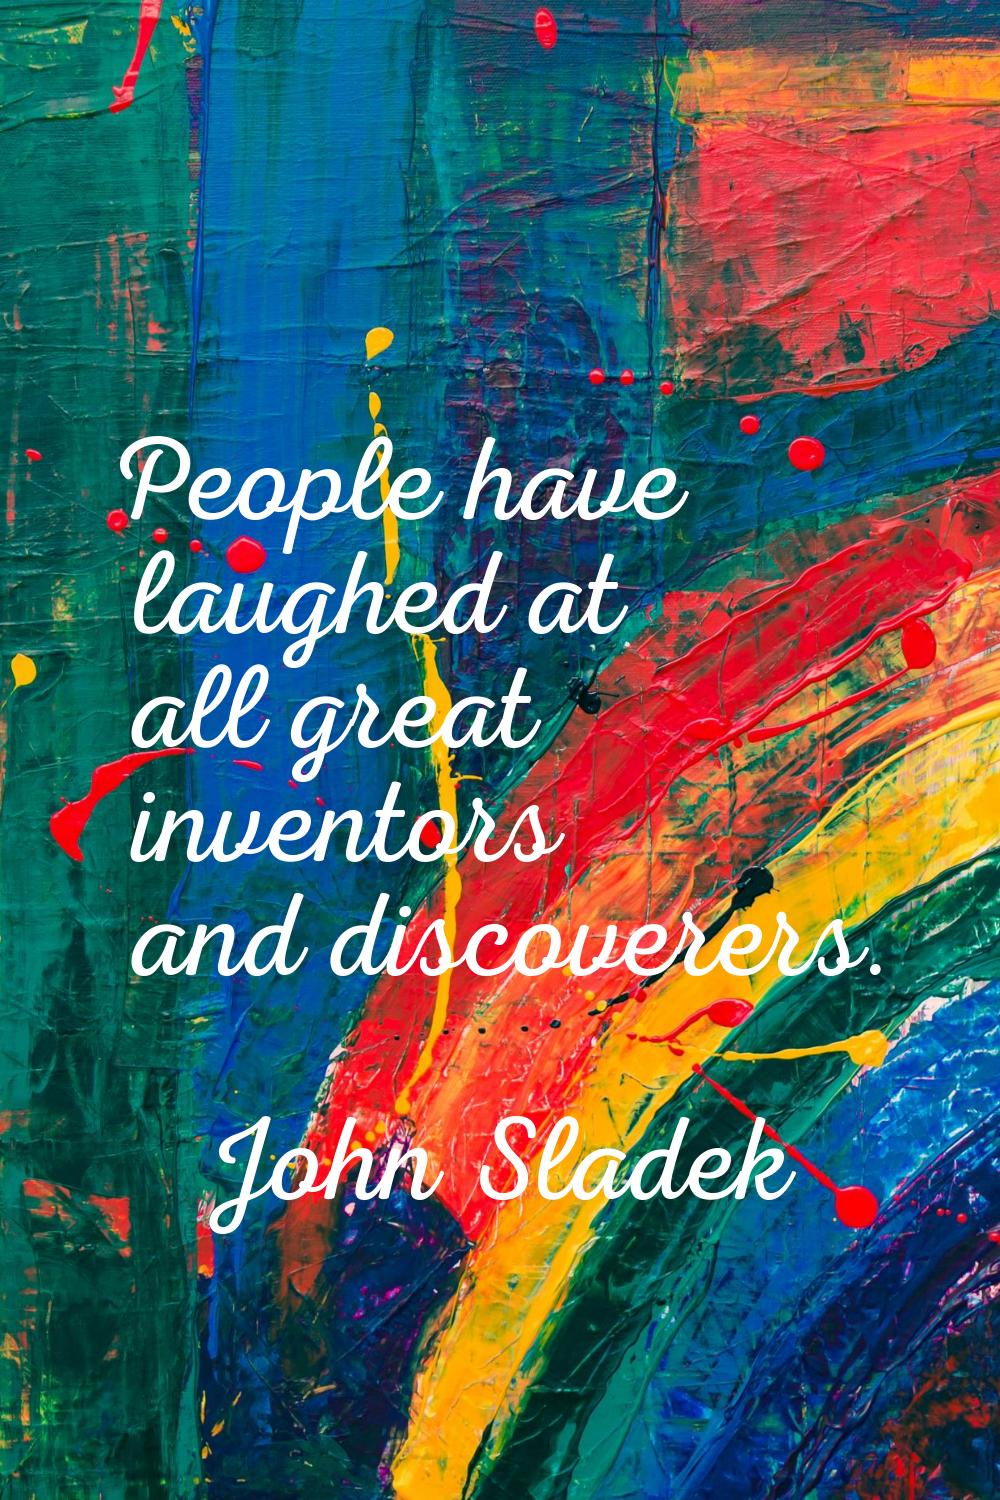 People have laughed at all great inventors and discoverers.